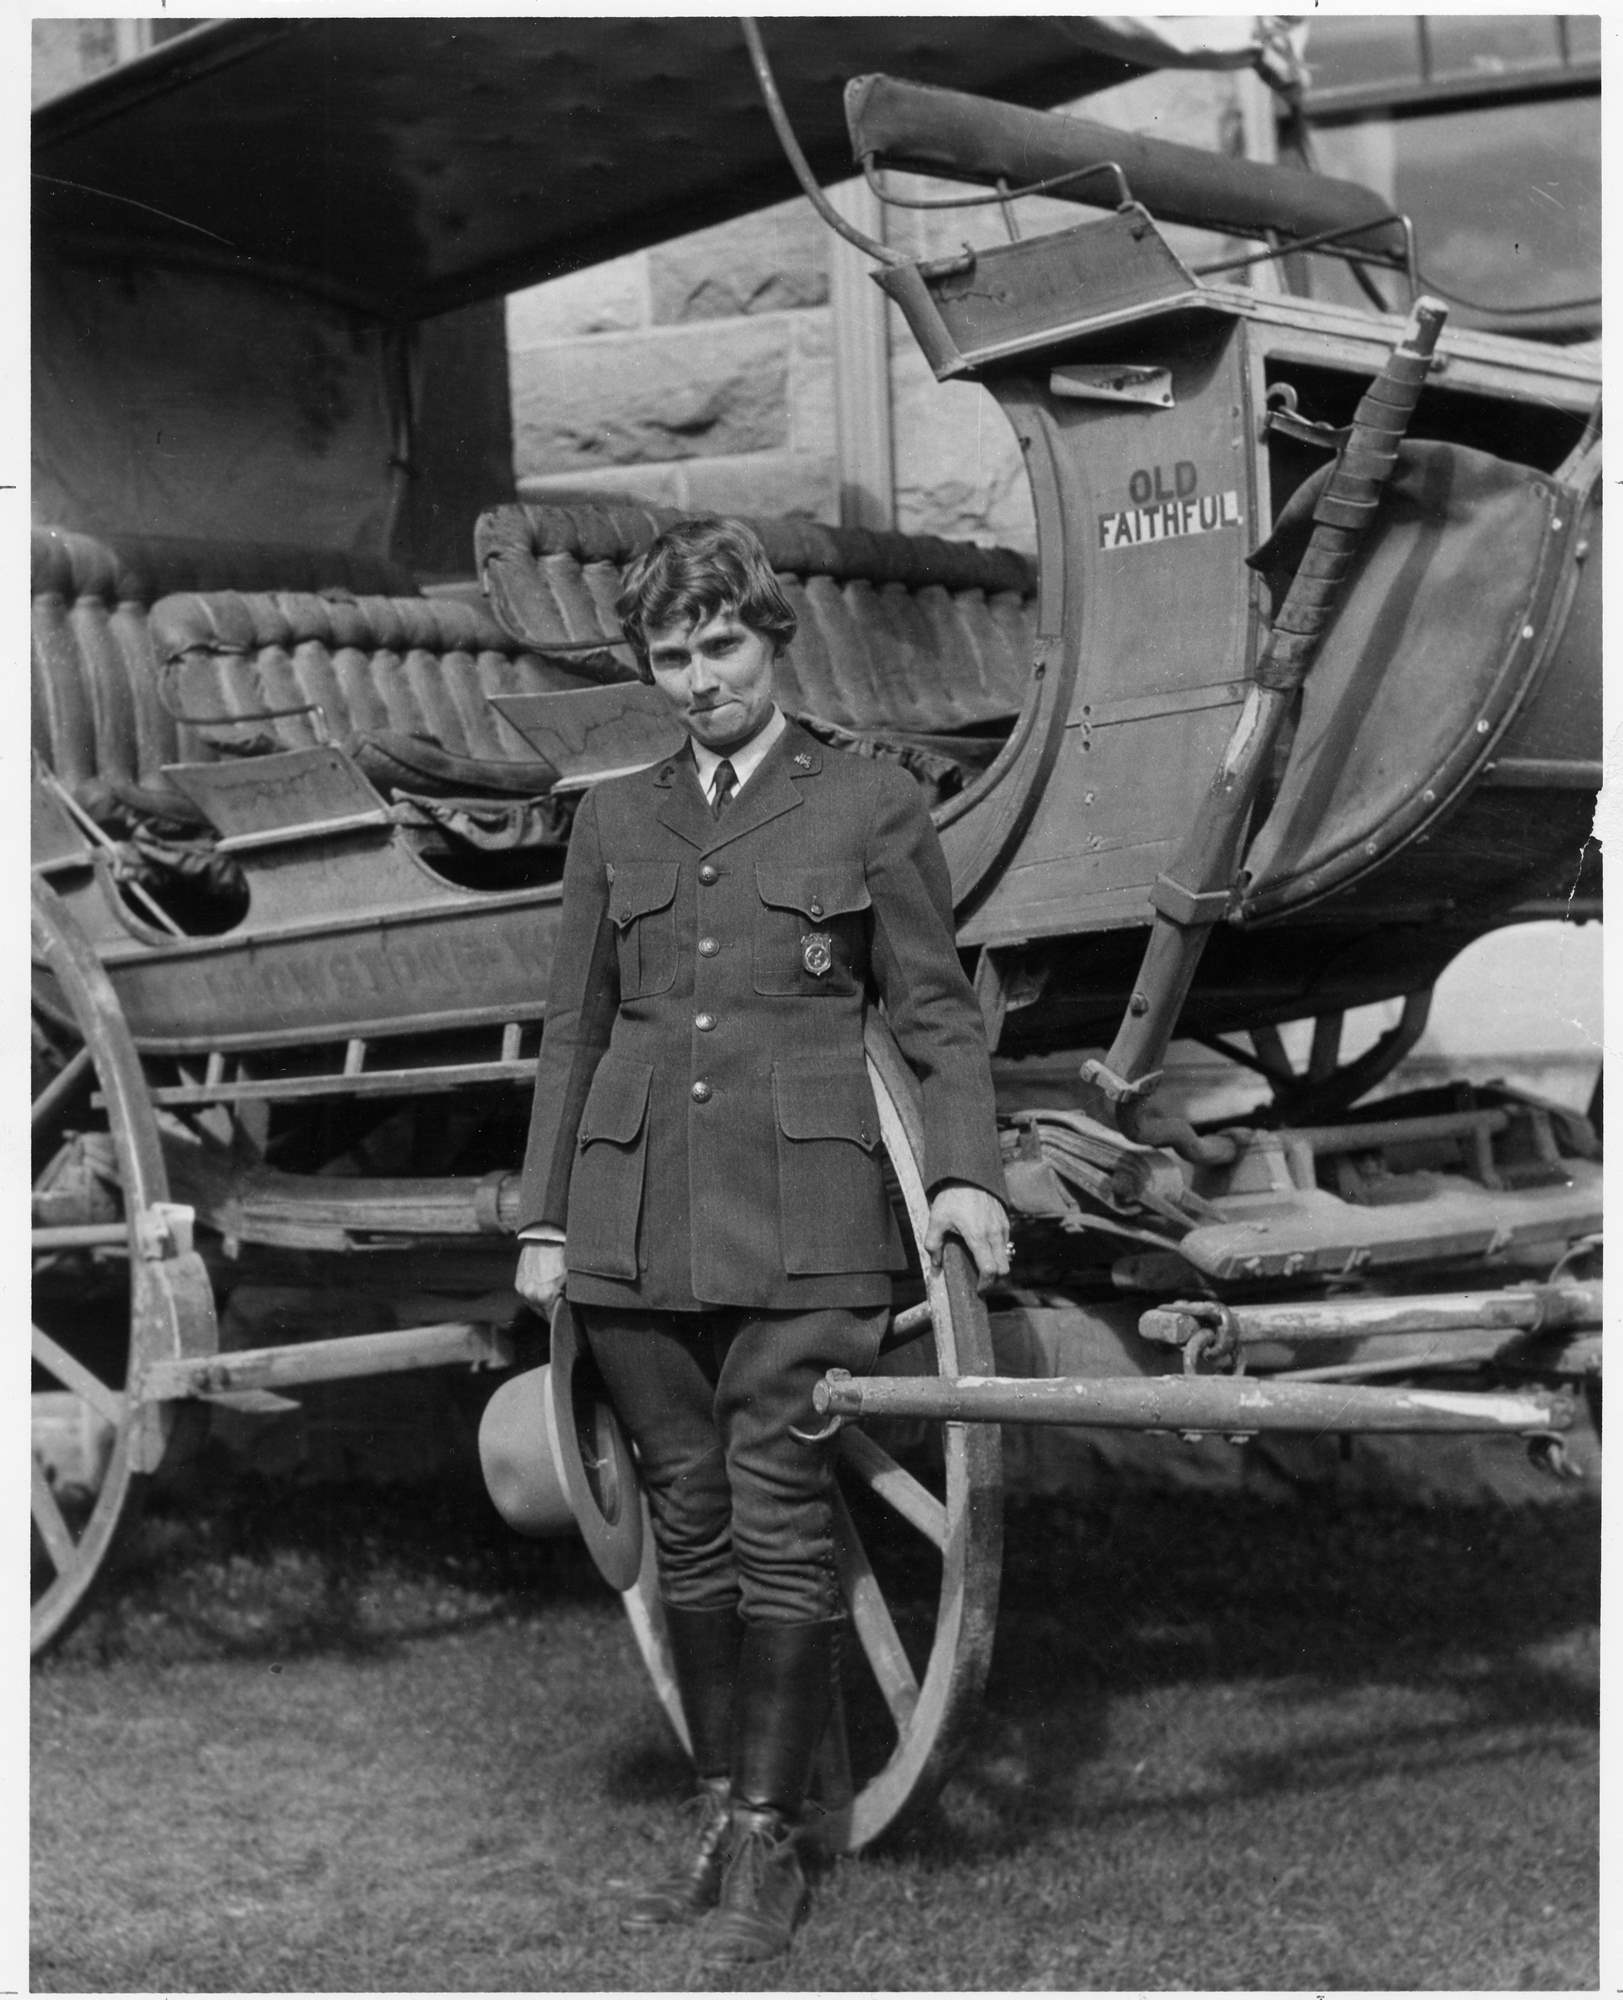 Herma Albertson poses in front of a stagecoach while wearing the NPS uniform with shield-shaped badge and holding a broad brim hat.